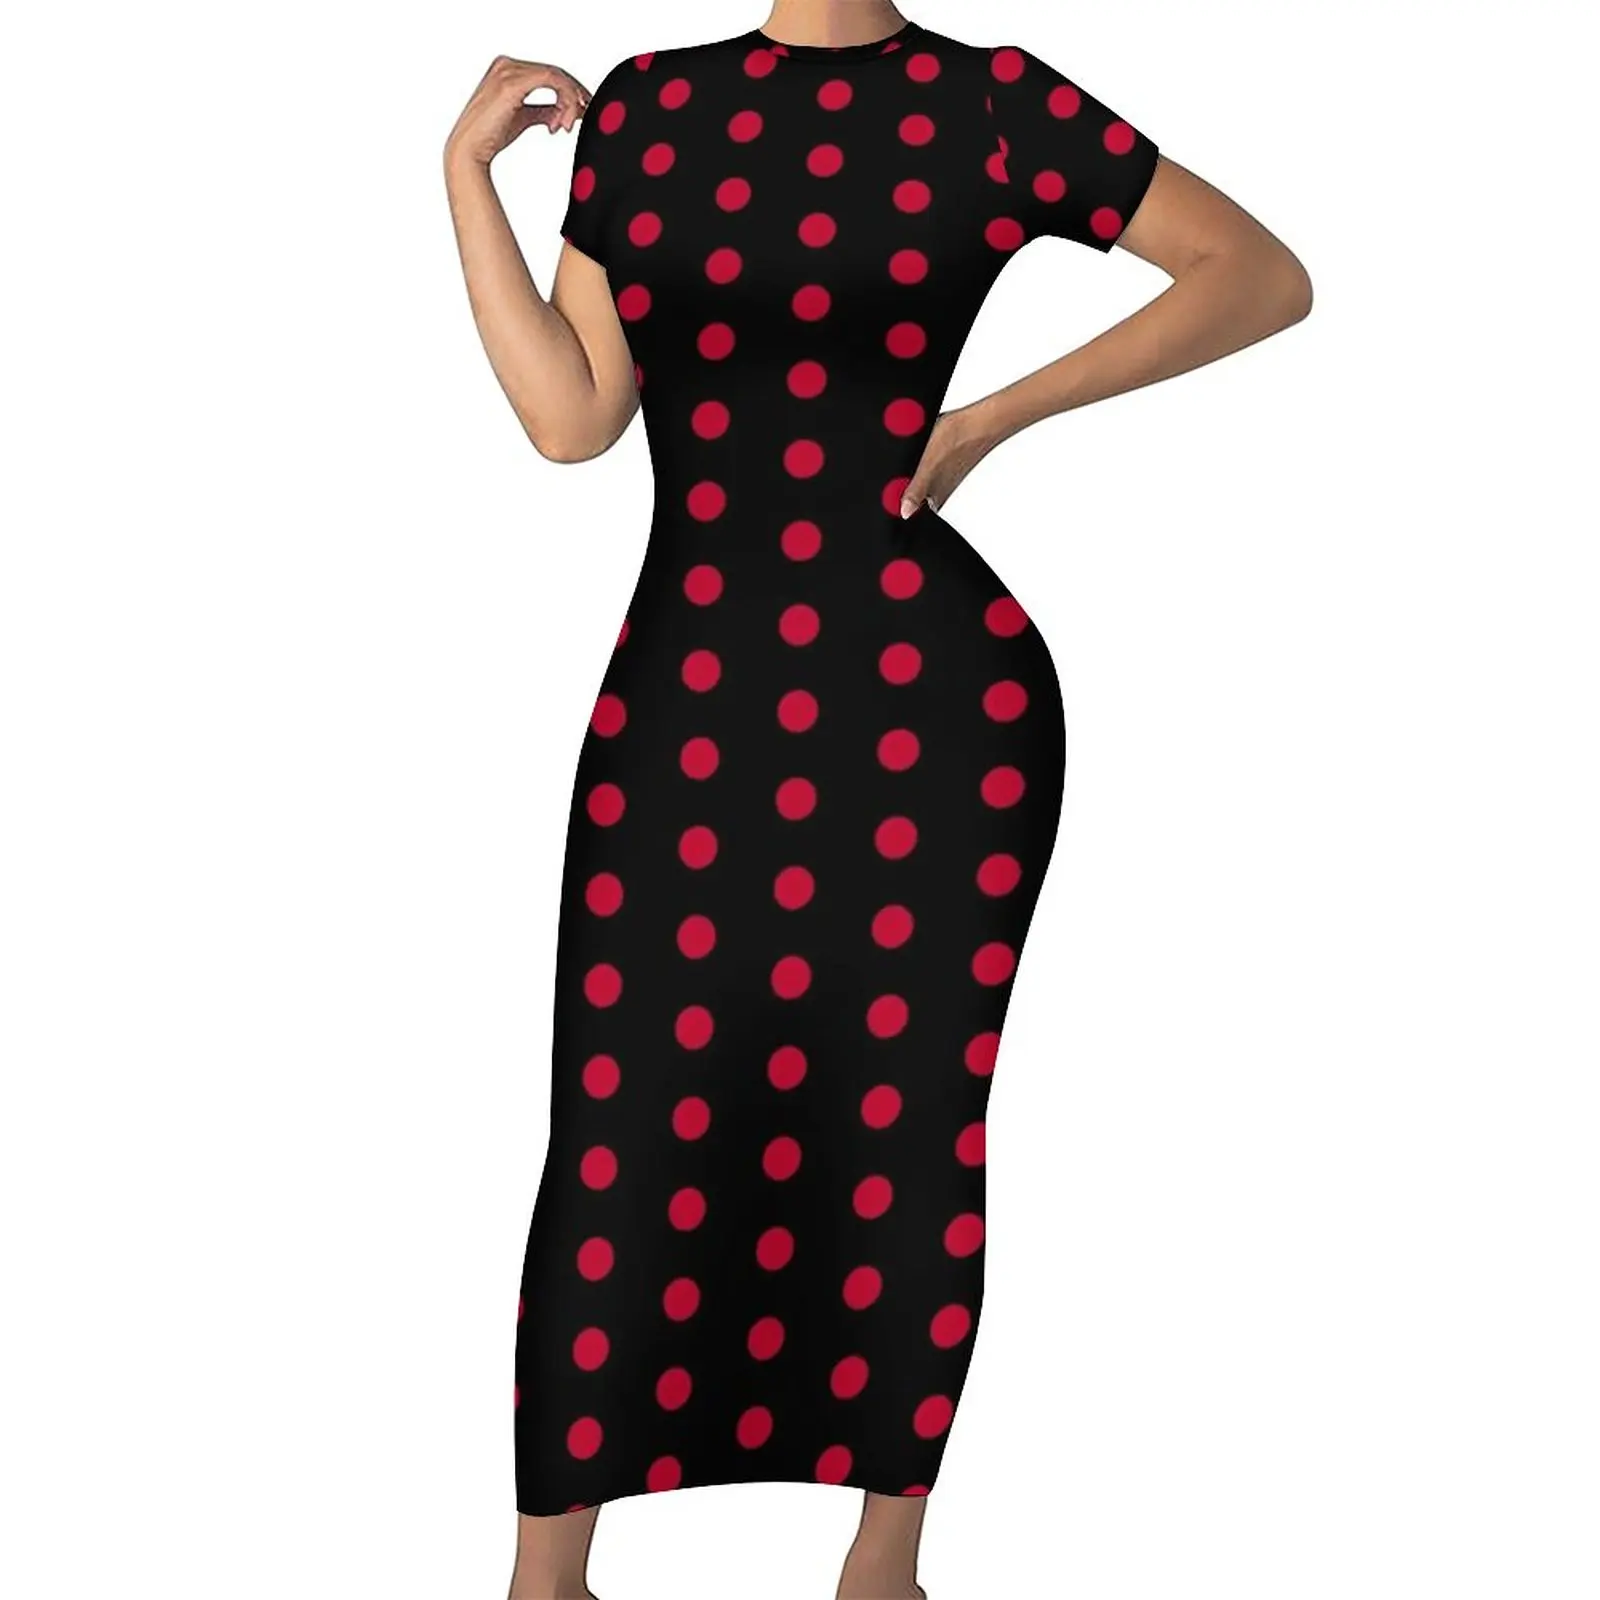 

Black with Red Polka Dot Dress Short Sleeve Dotted 70S Vintage Street Maxi Dresses Night Club Bodycon Dress Oversize Clothing